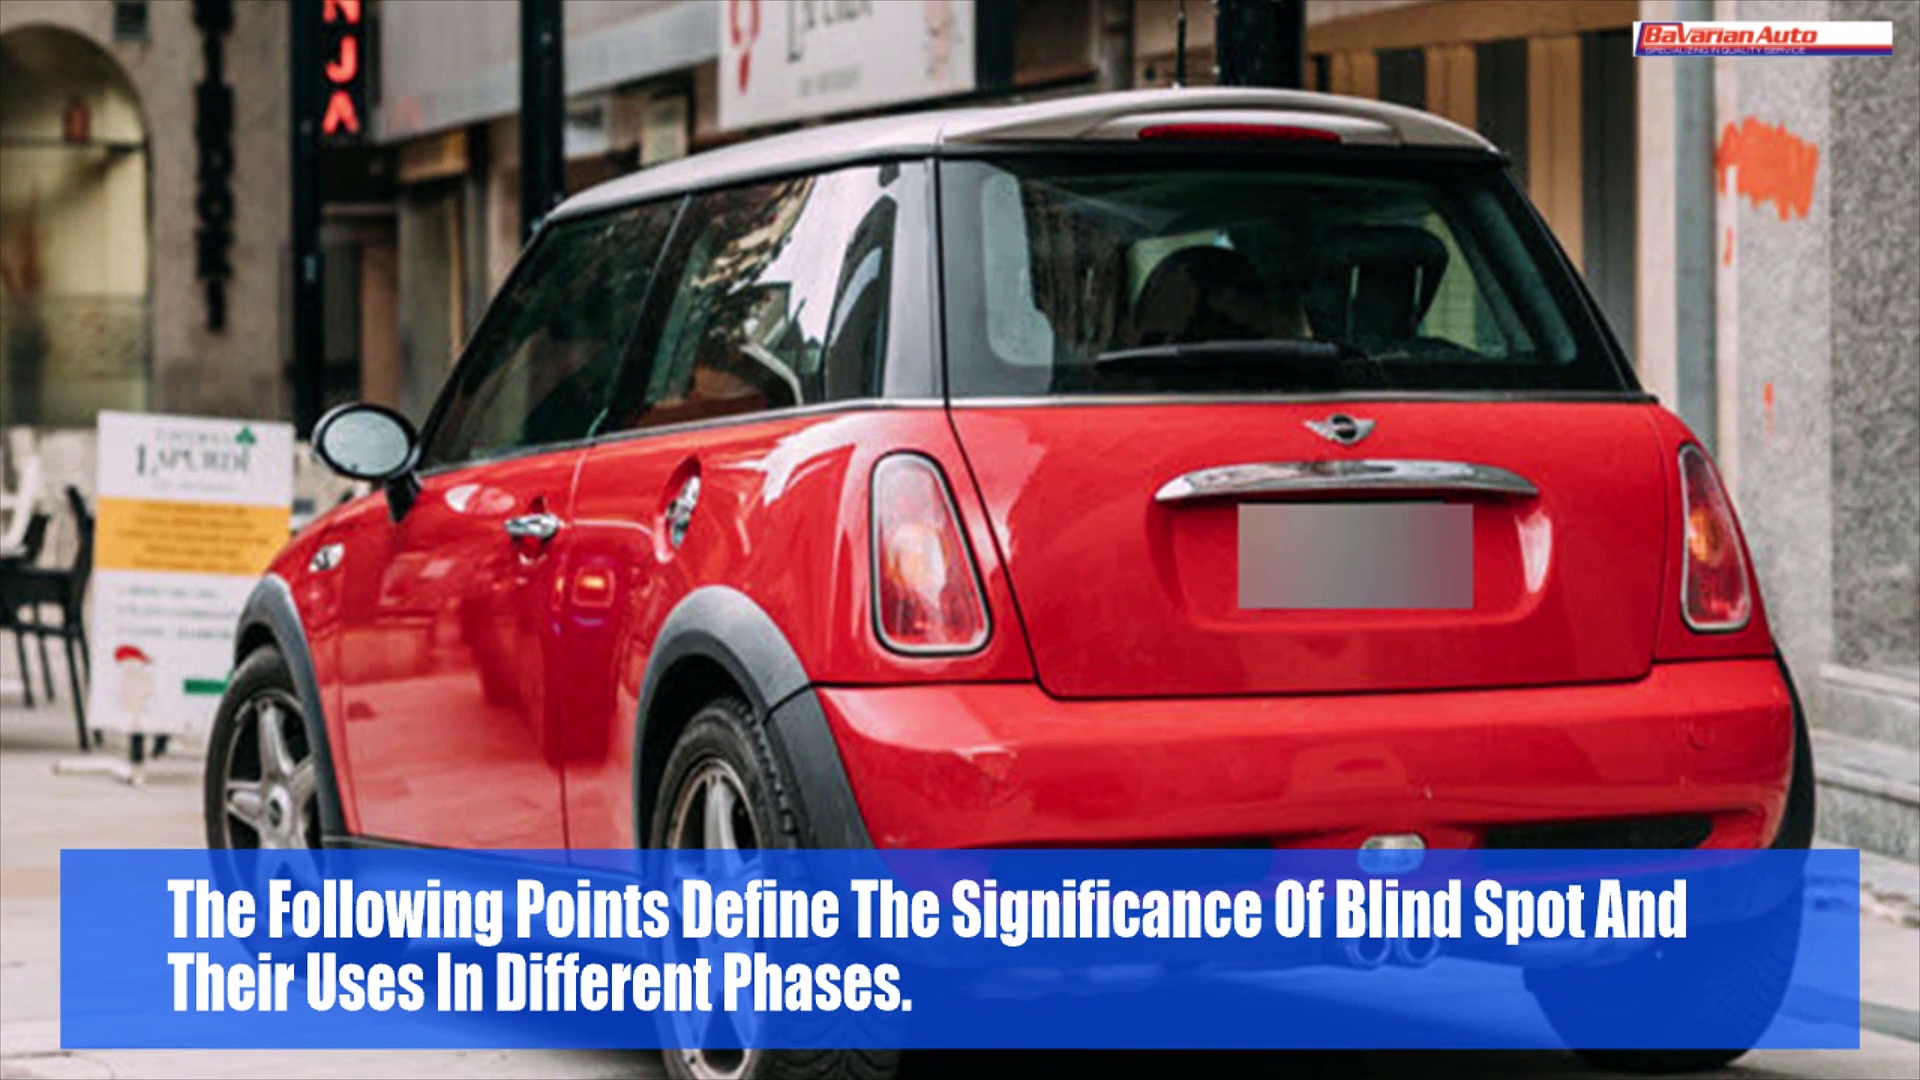 What are the Working Principles of Blind Spot Detection Technology